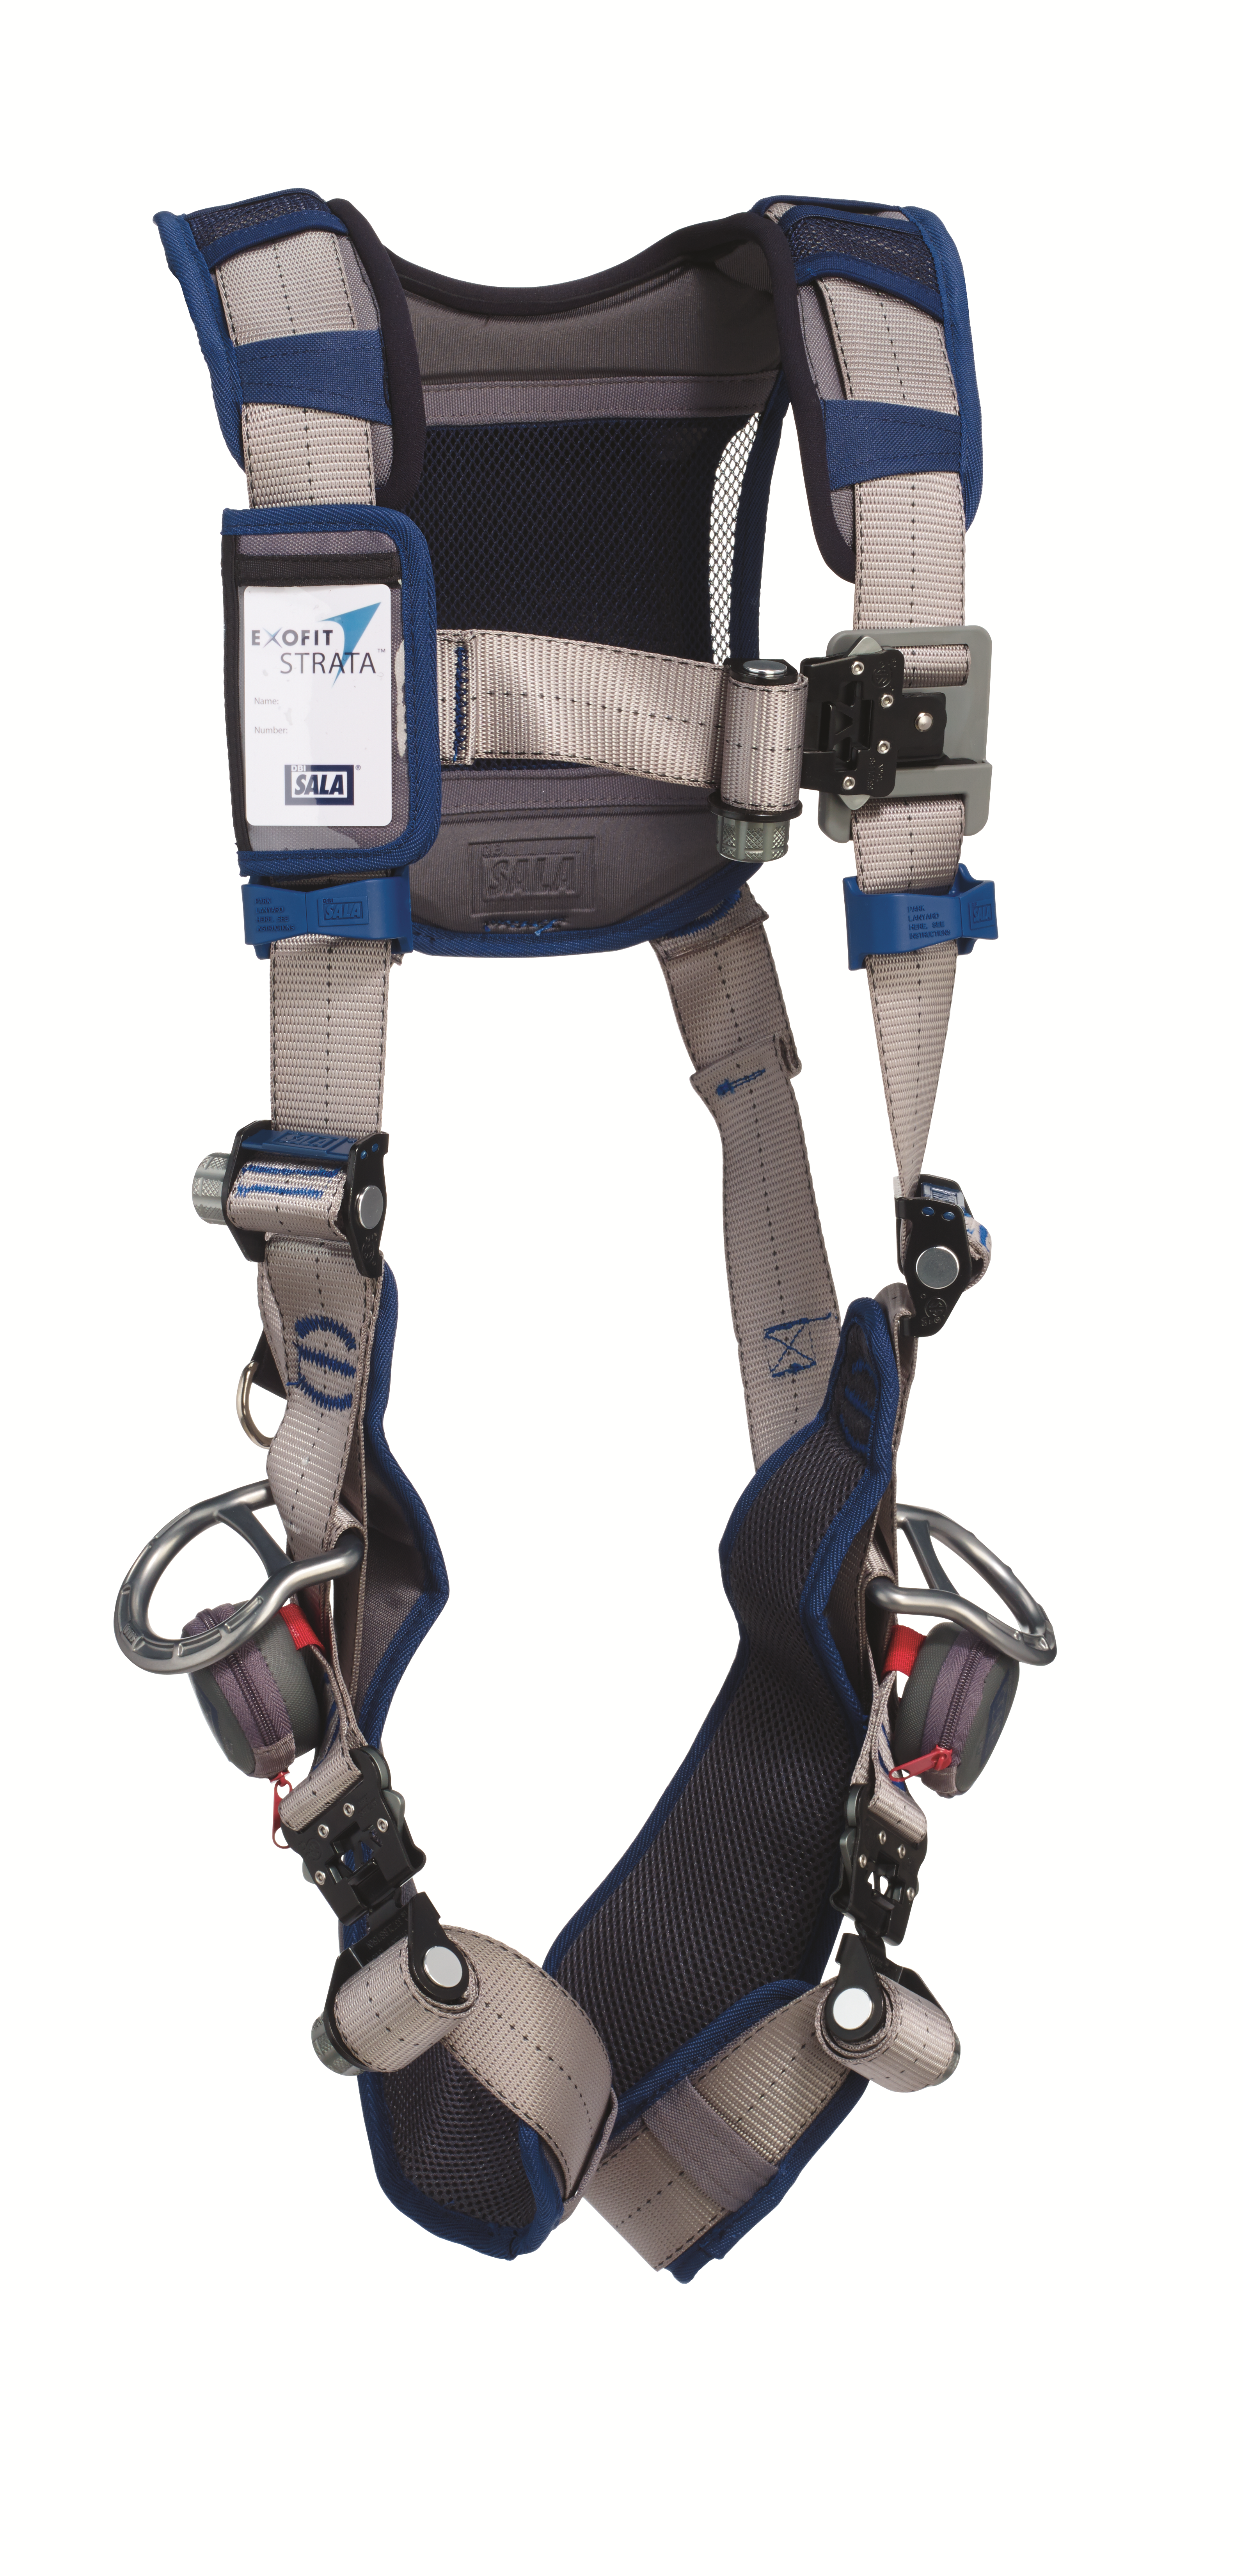 https://www.engineeredfallprotection.com/store/images/thumbs/0000629_3m-dbi-sala-exofit-strata-vest-style-positioning-harness-triple-action-chest-and-leg-buckles-side-d-.png